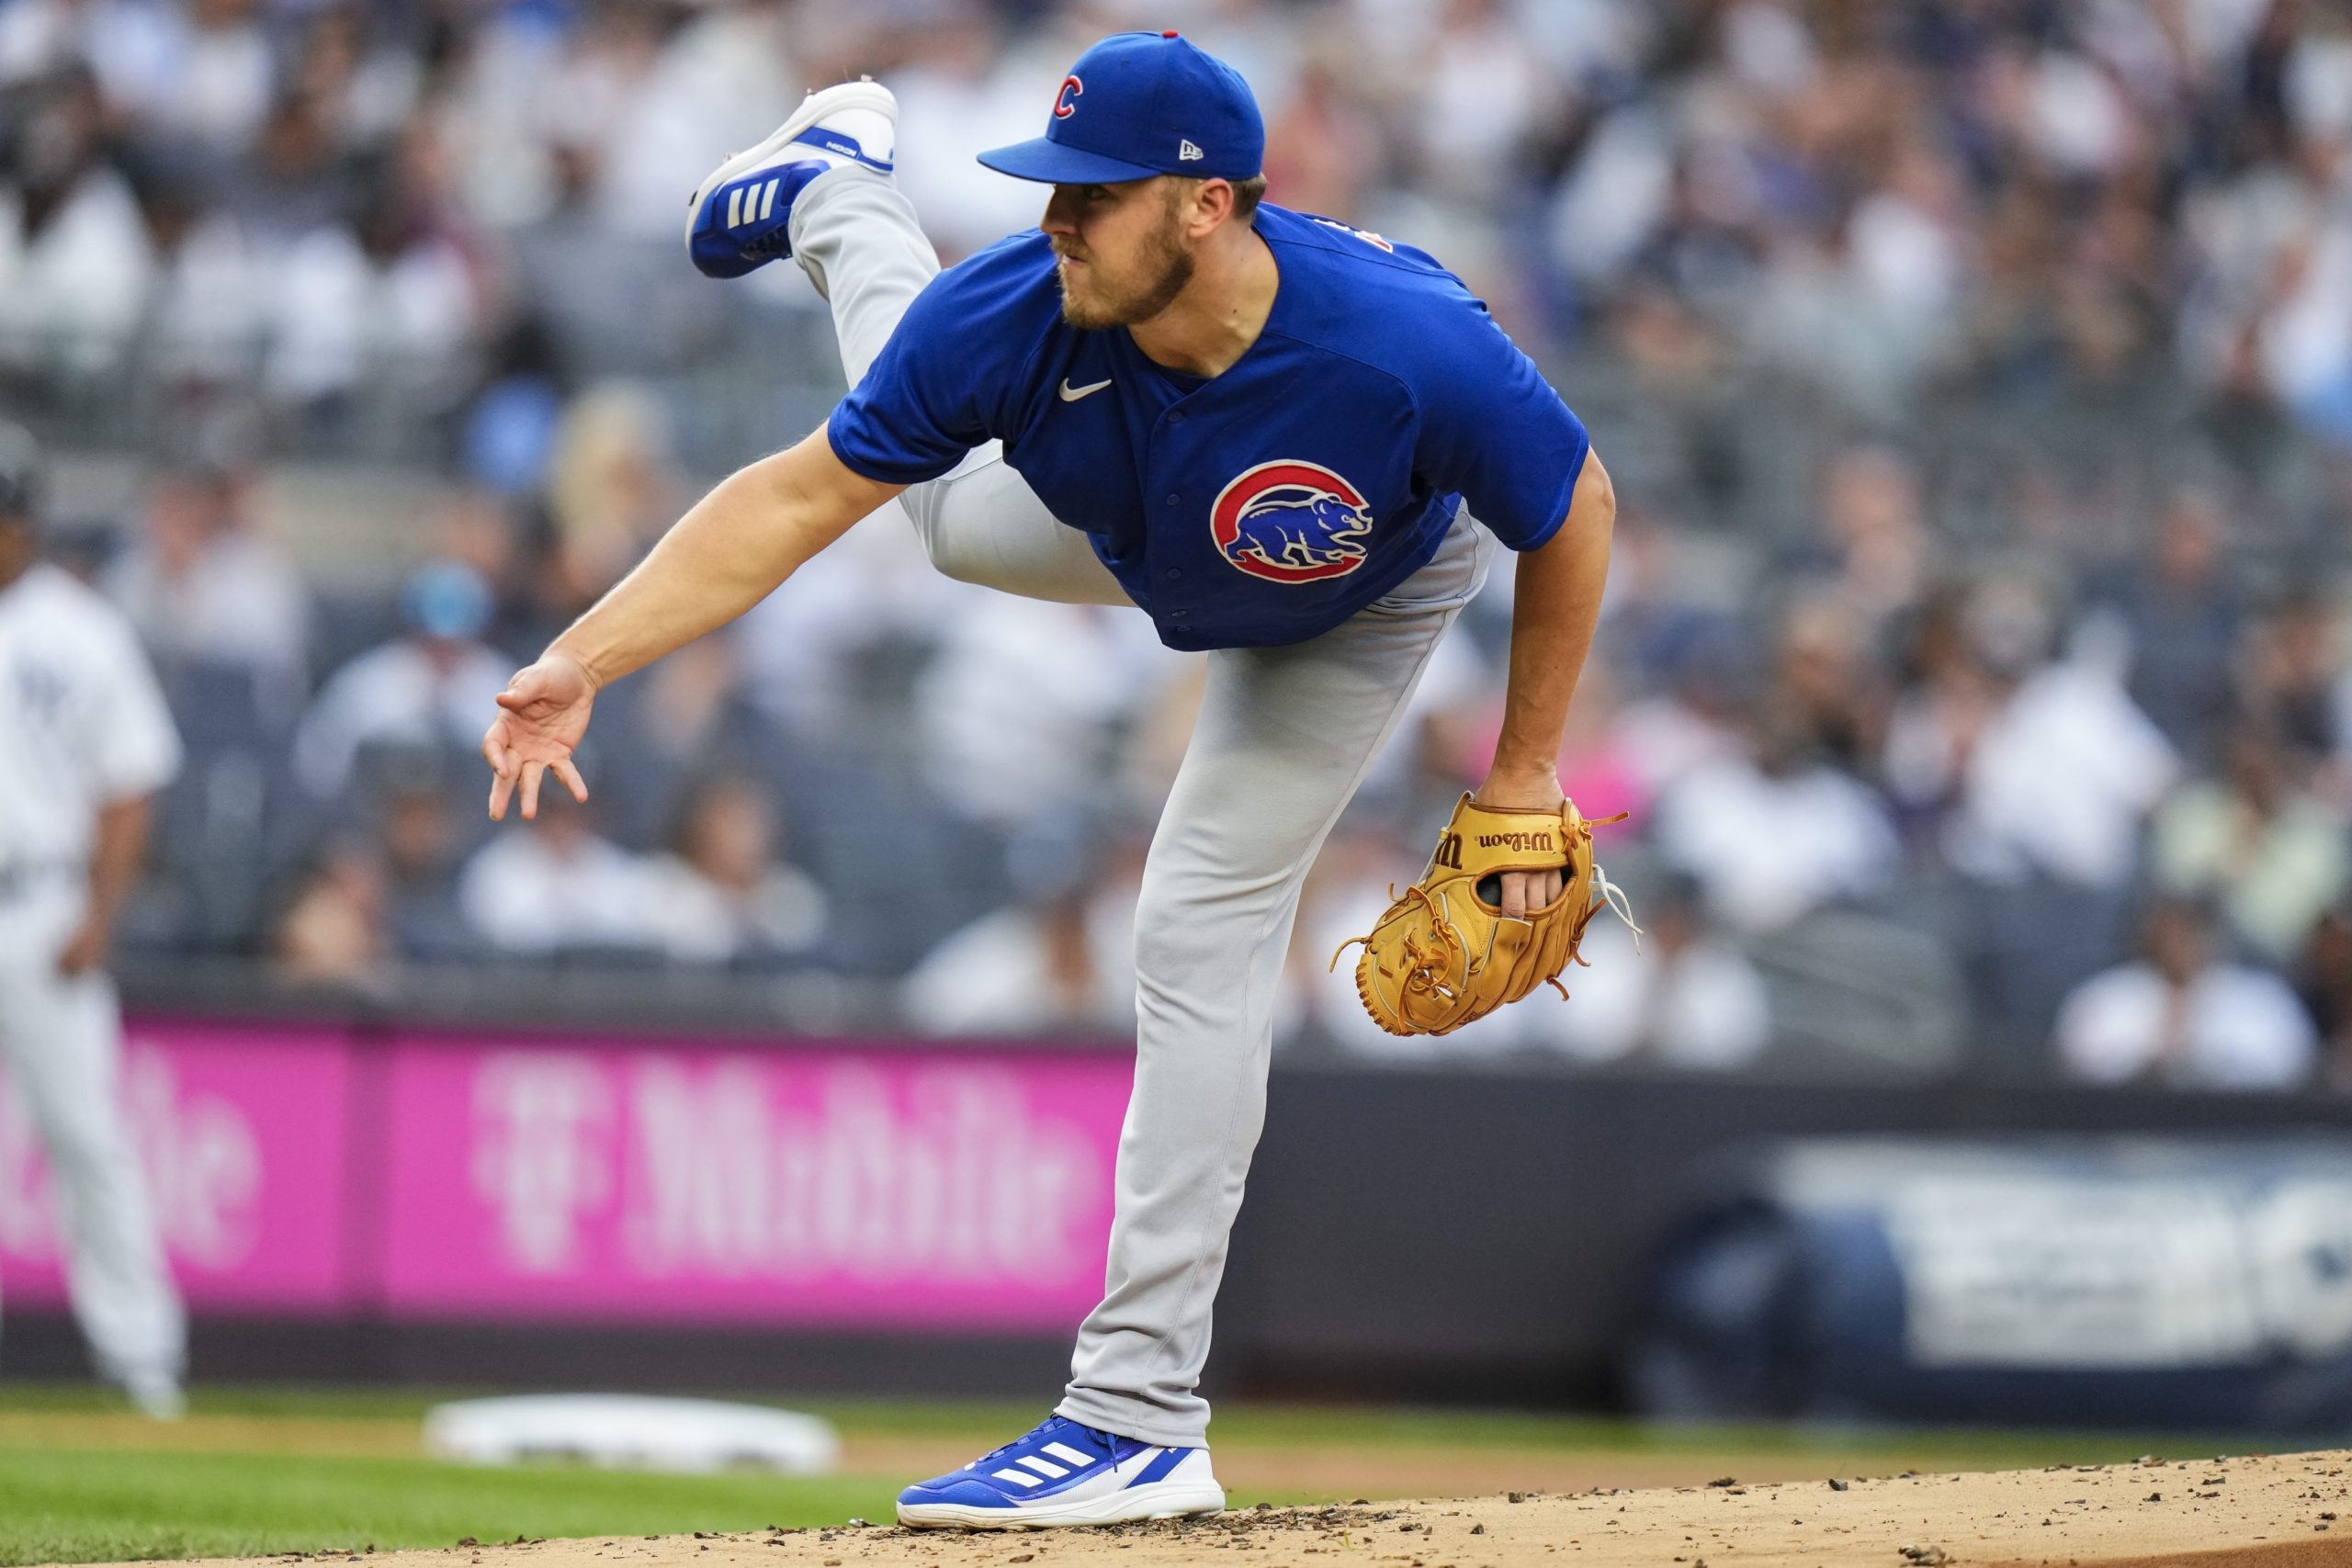 Chicago Cubs' Jameson Taillon pitches during the first inning of a baseball game against the New York Yankees, Friday in New York.